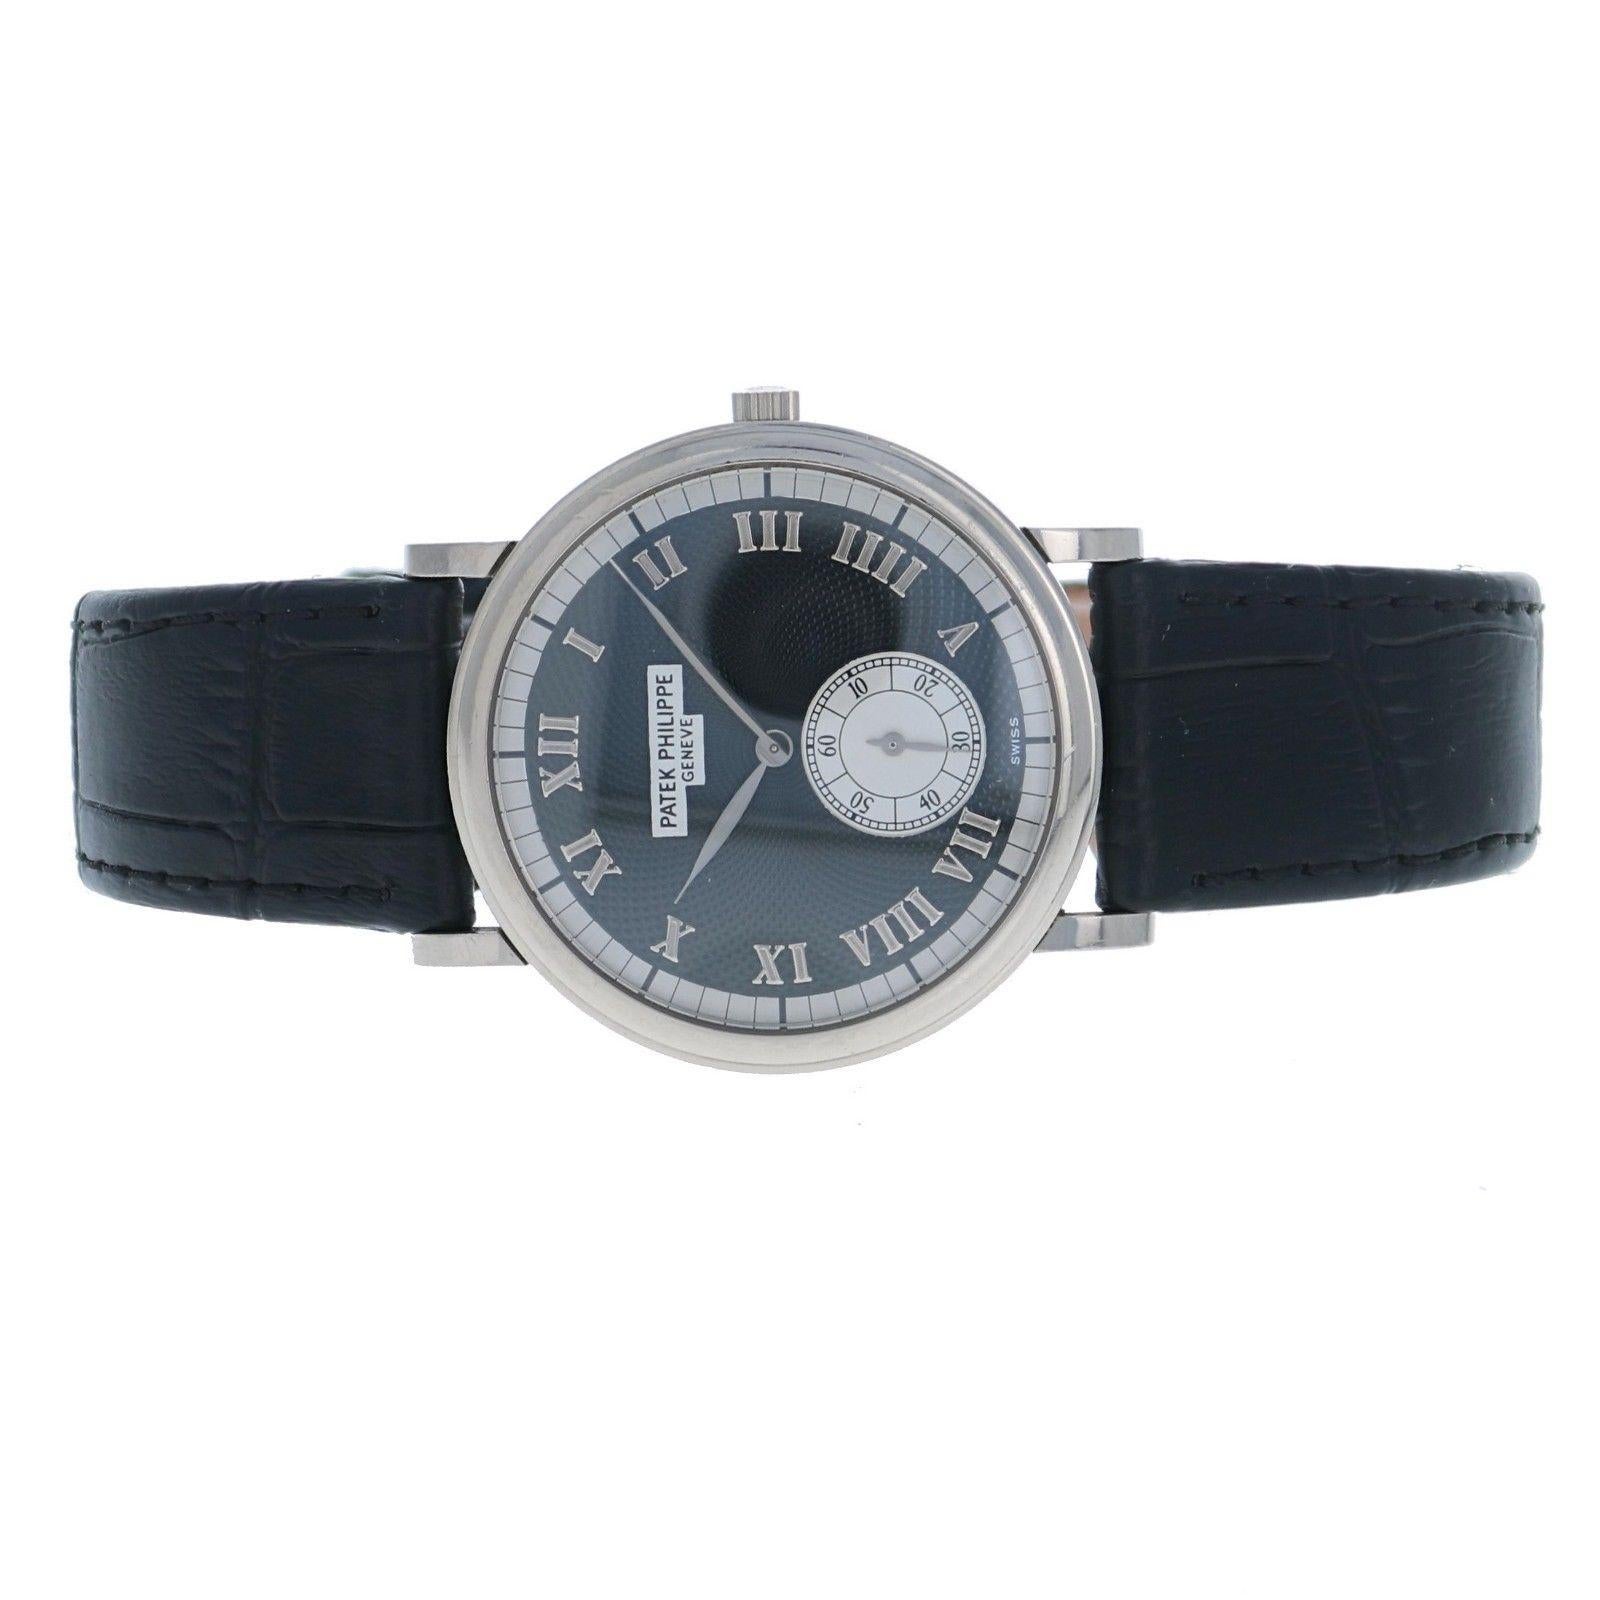 Brand Name  Patek Philippe 
Style Number  5022G 
Also Called  5022 G 
Series  Calatrava 
Gender  Men's 
Case Material  18K White Gold 
Dial Color  Black guilloche engraved, applied white gold Roman numeral hour markers, silvered outer chapter ring